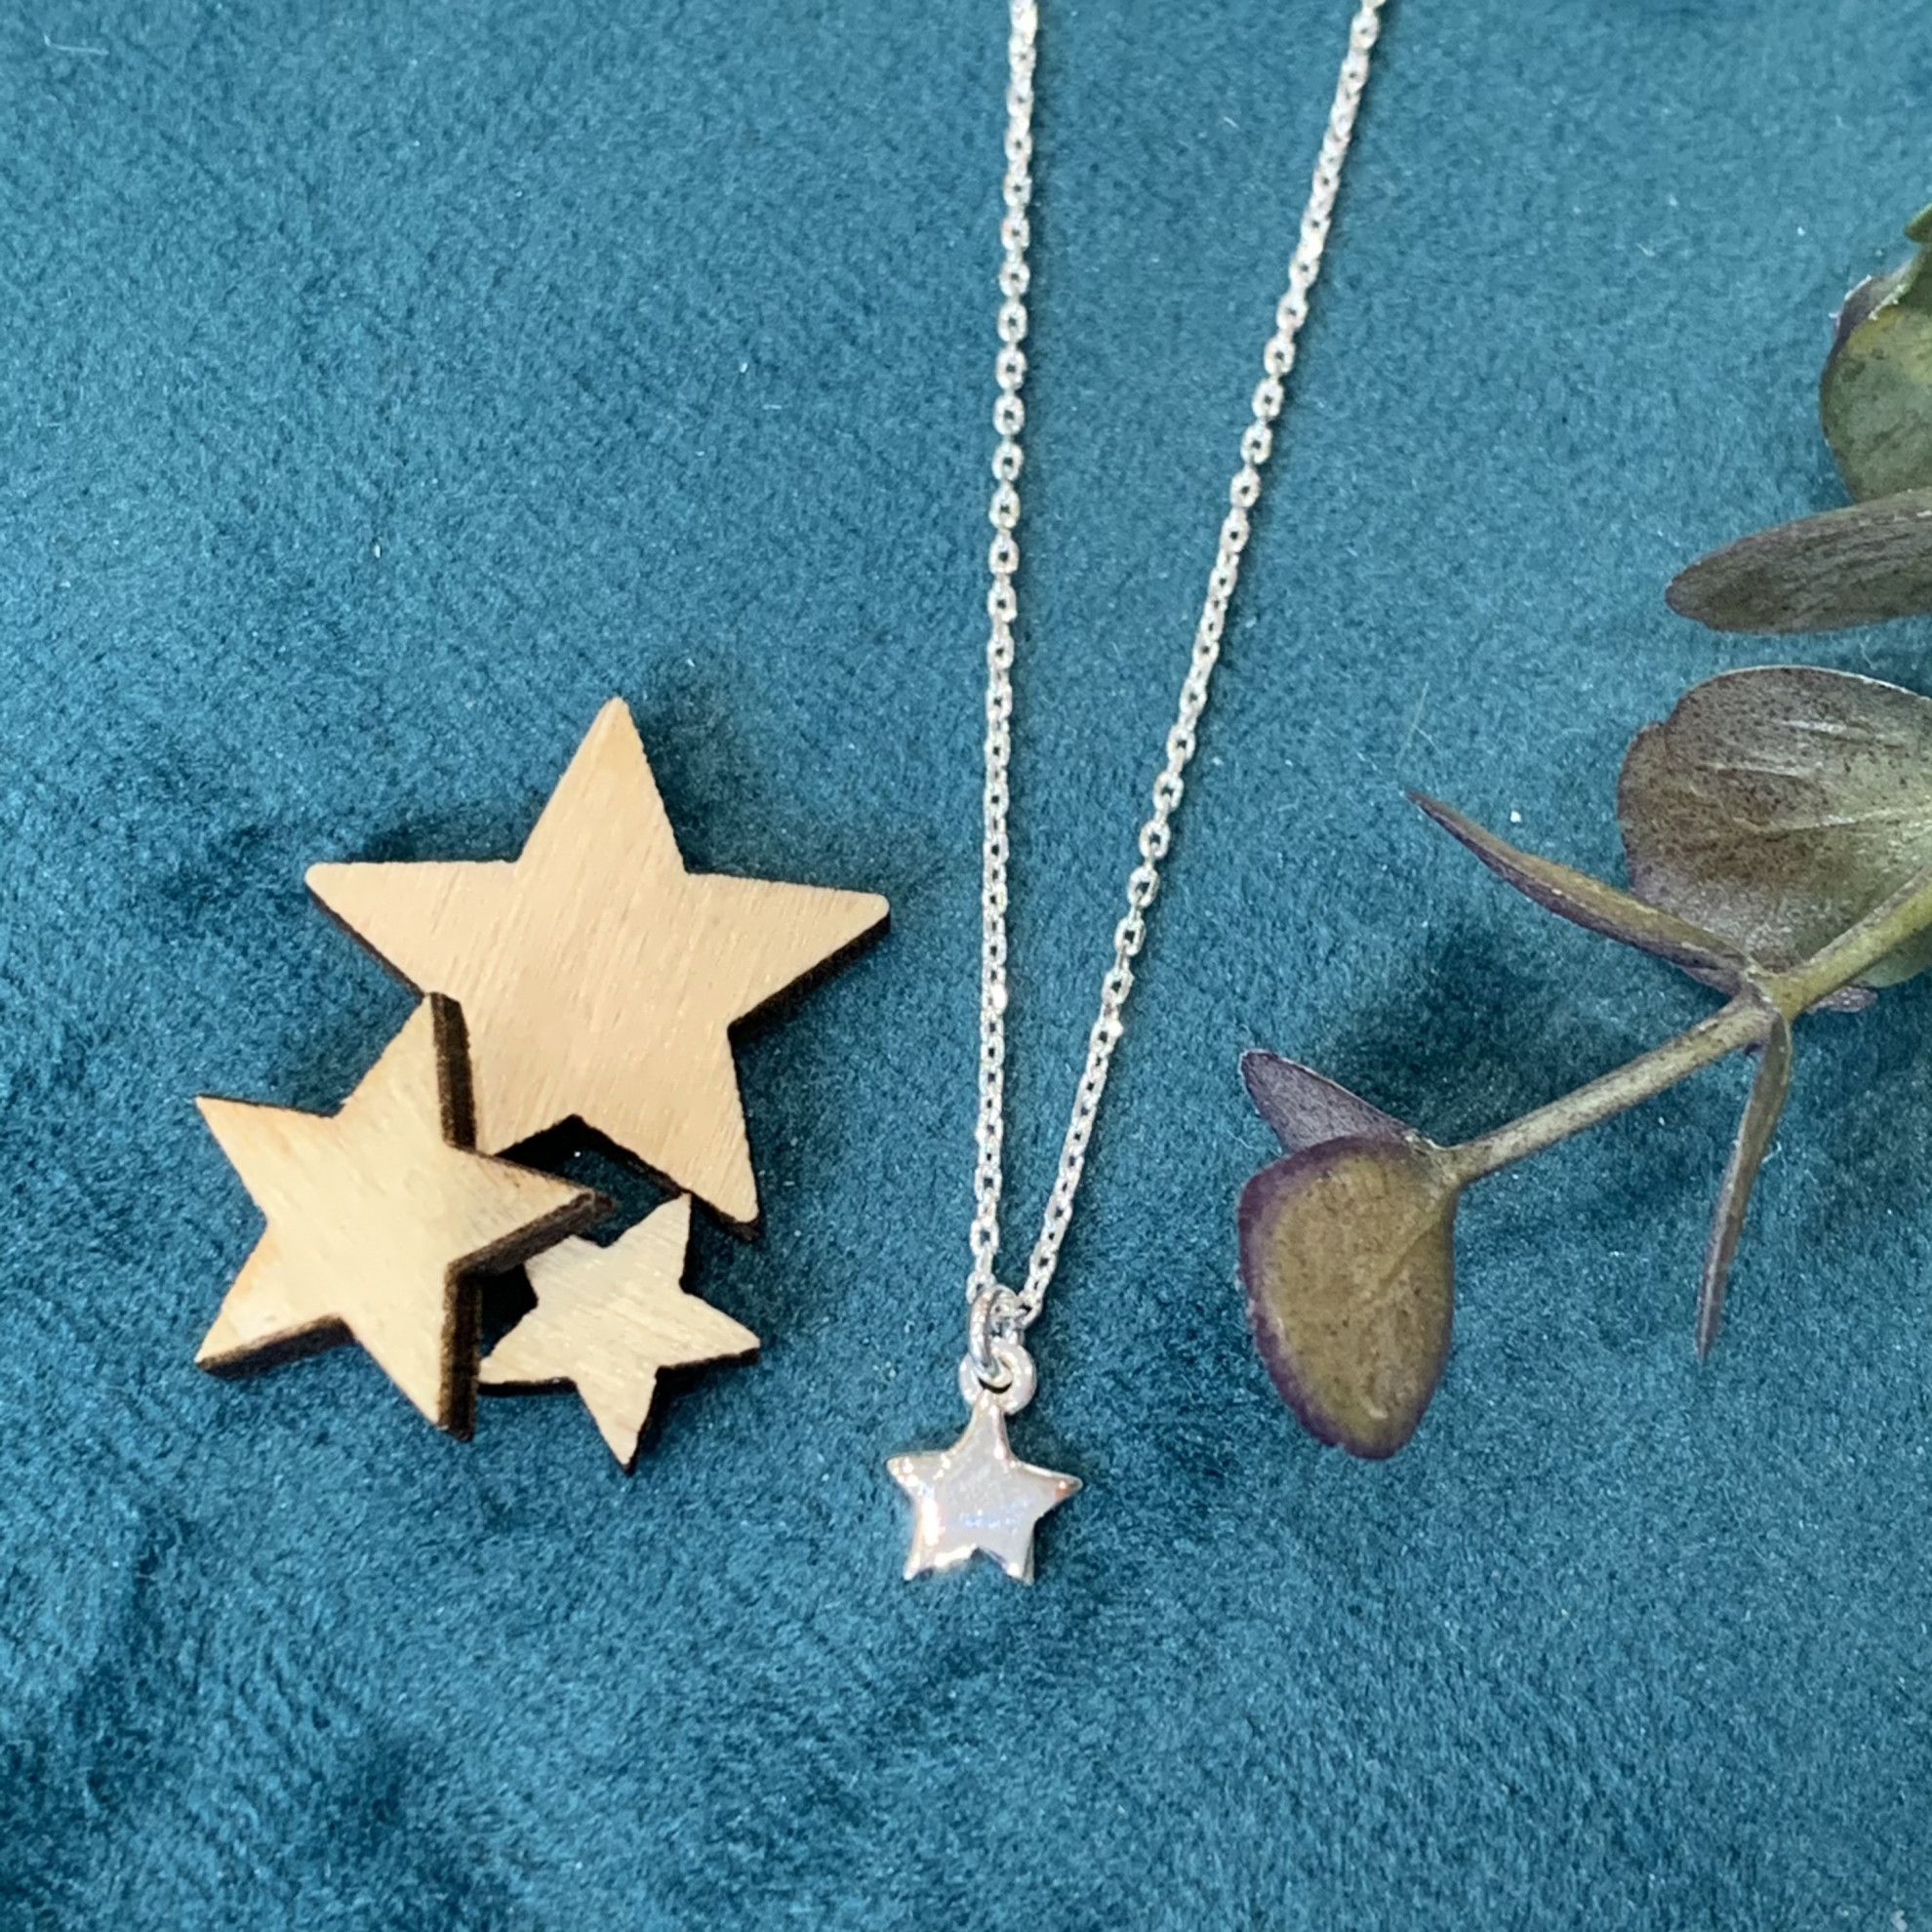 41-45cm Small Star on Chain 1